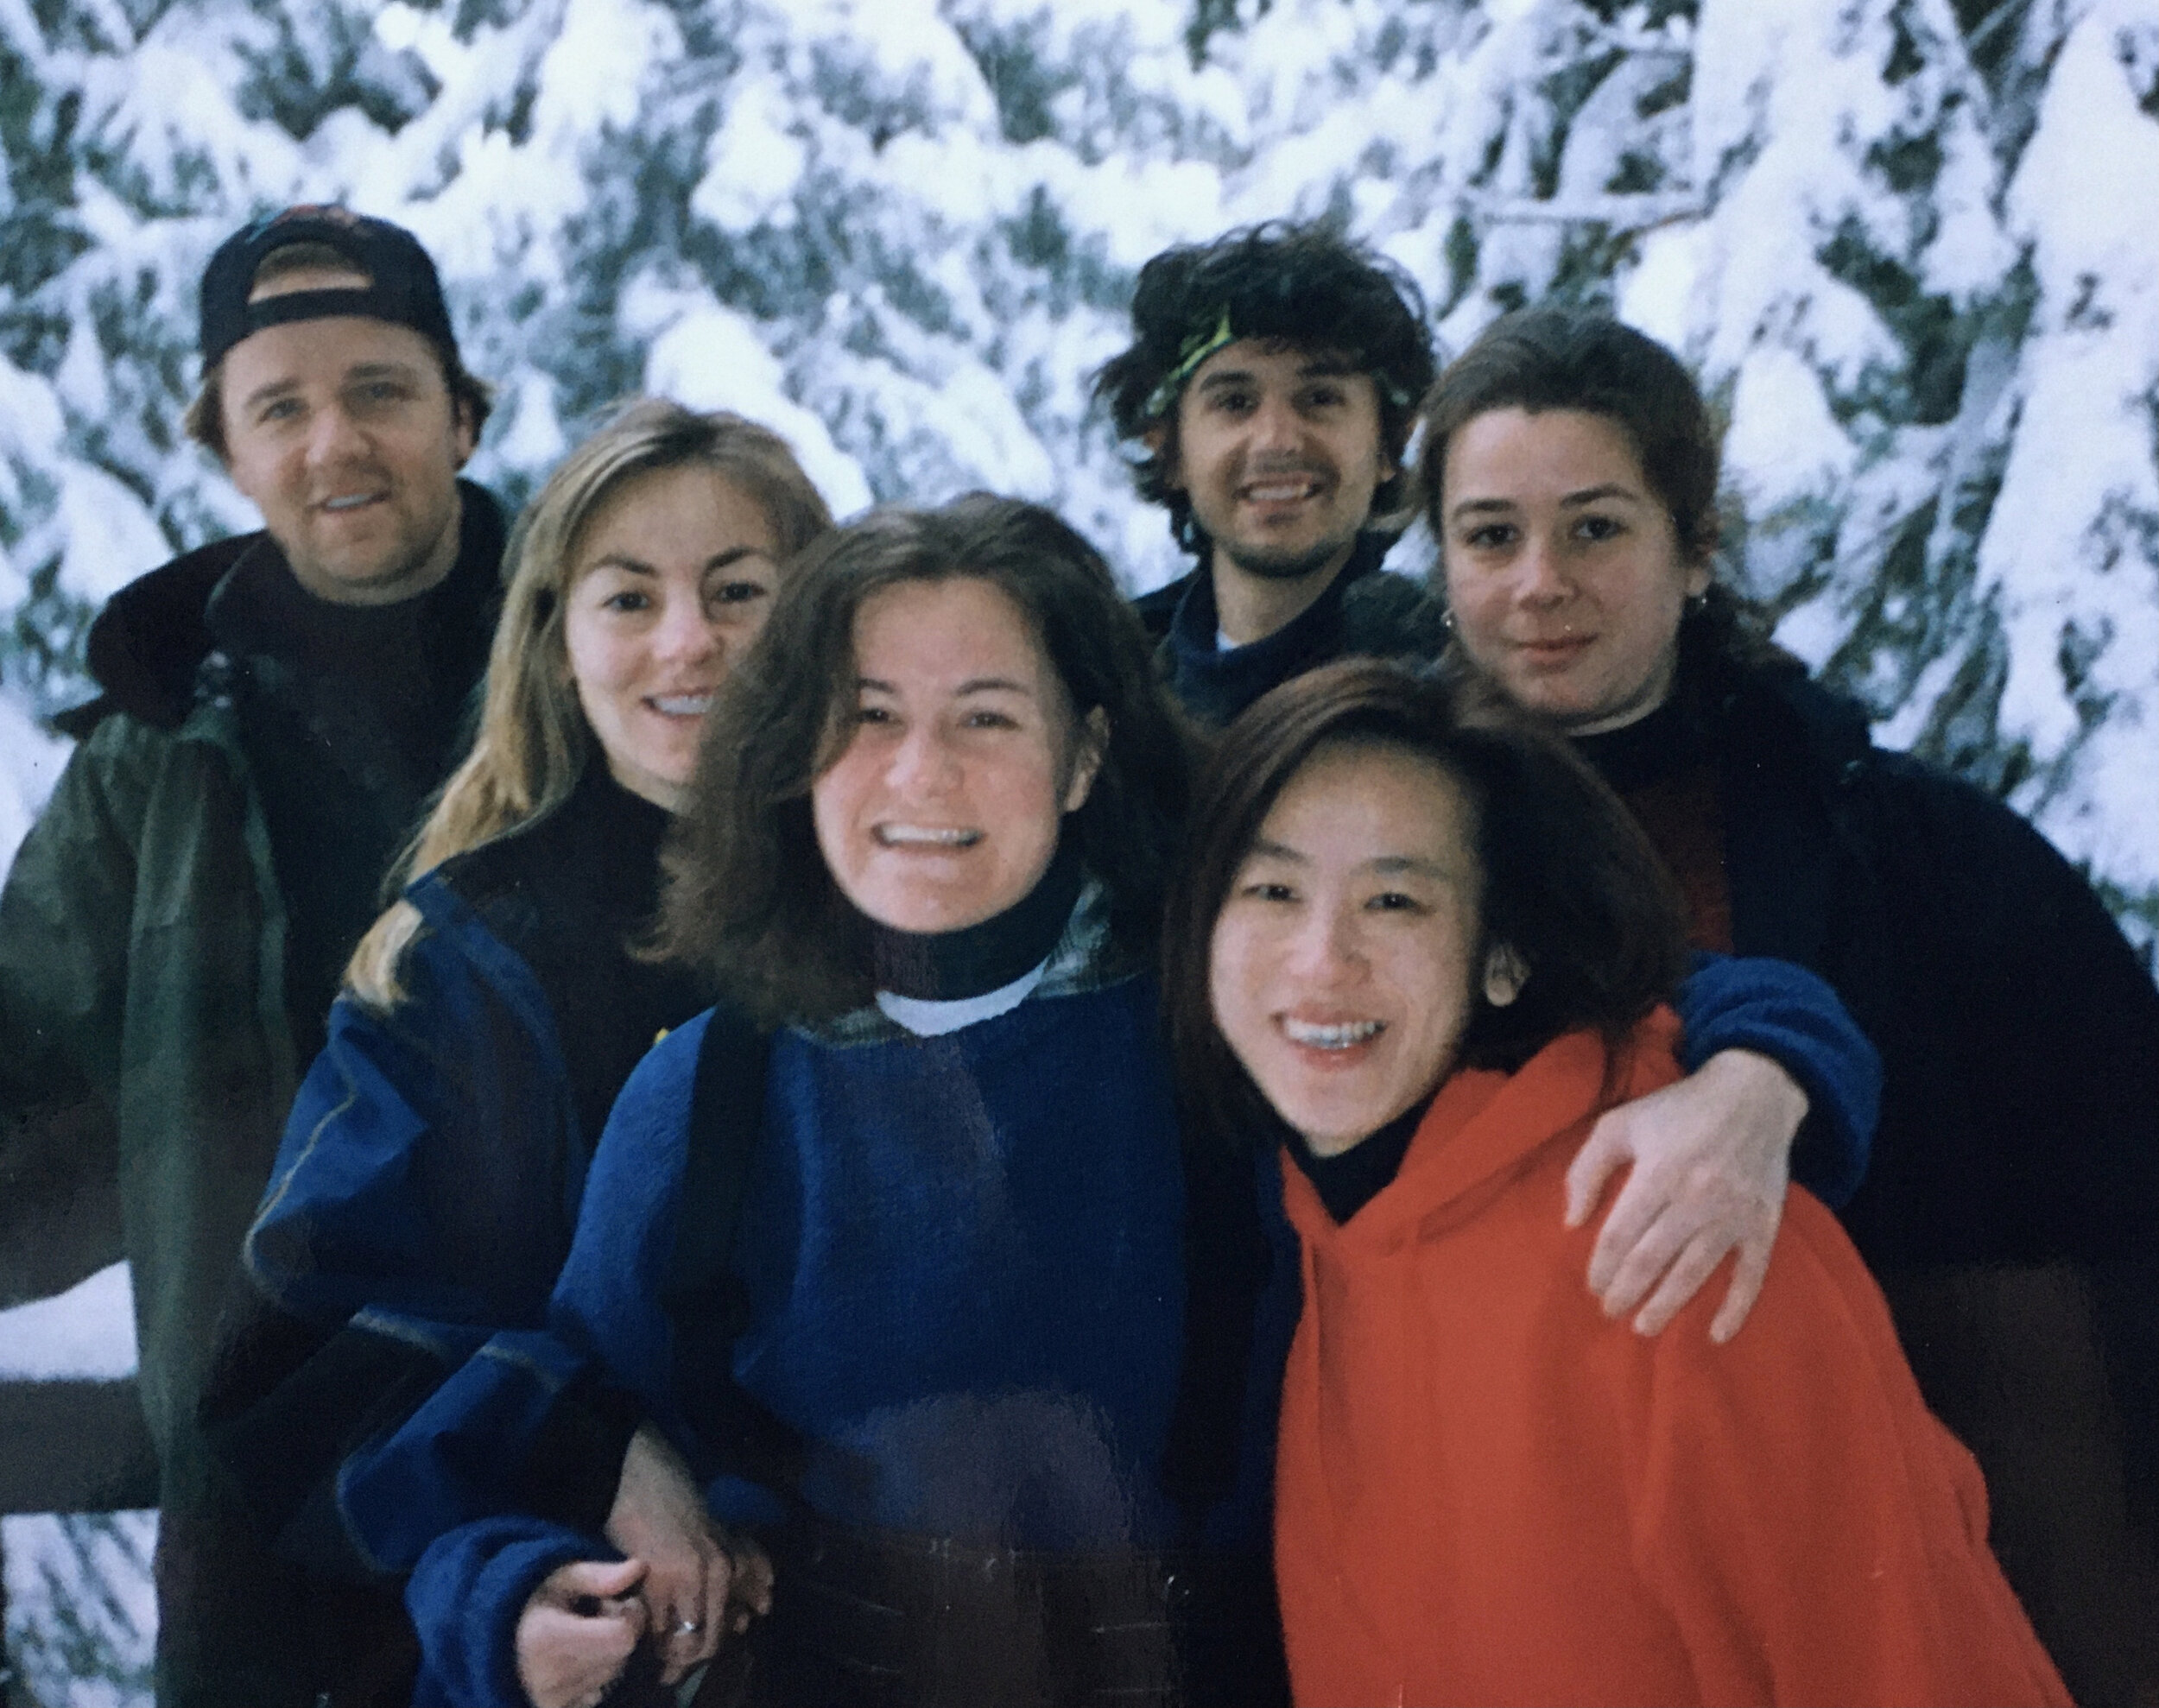  Trish with Jaqui Lopez, Ellen Poon, Kerie Kimbrell, Luke O’Byrne on a snowboarding holiday from ILM.  